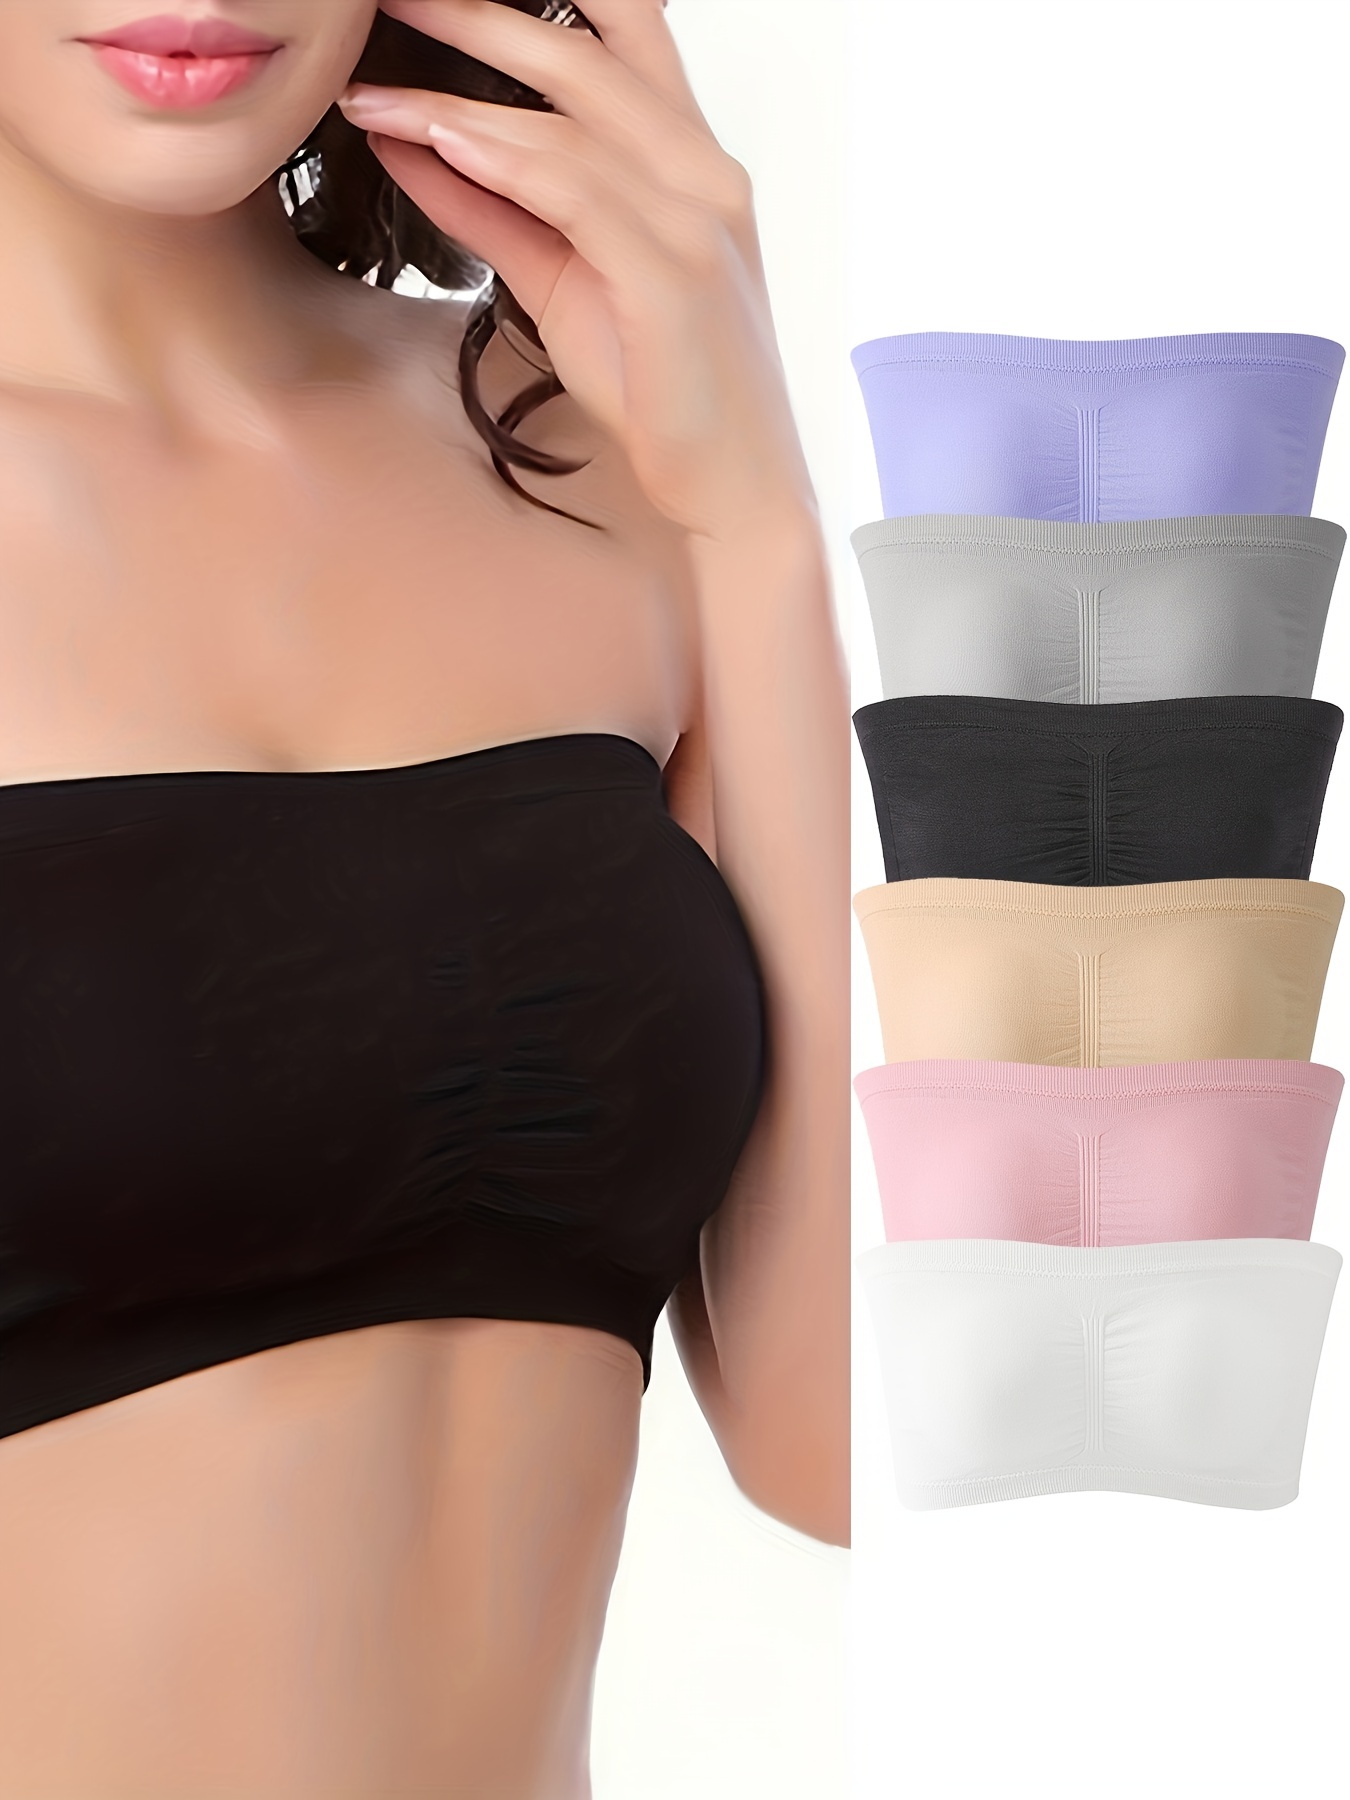 Bandeau Bras, Everyday Low Prices